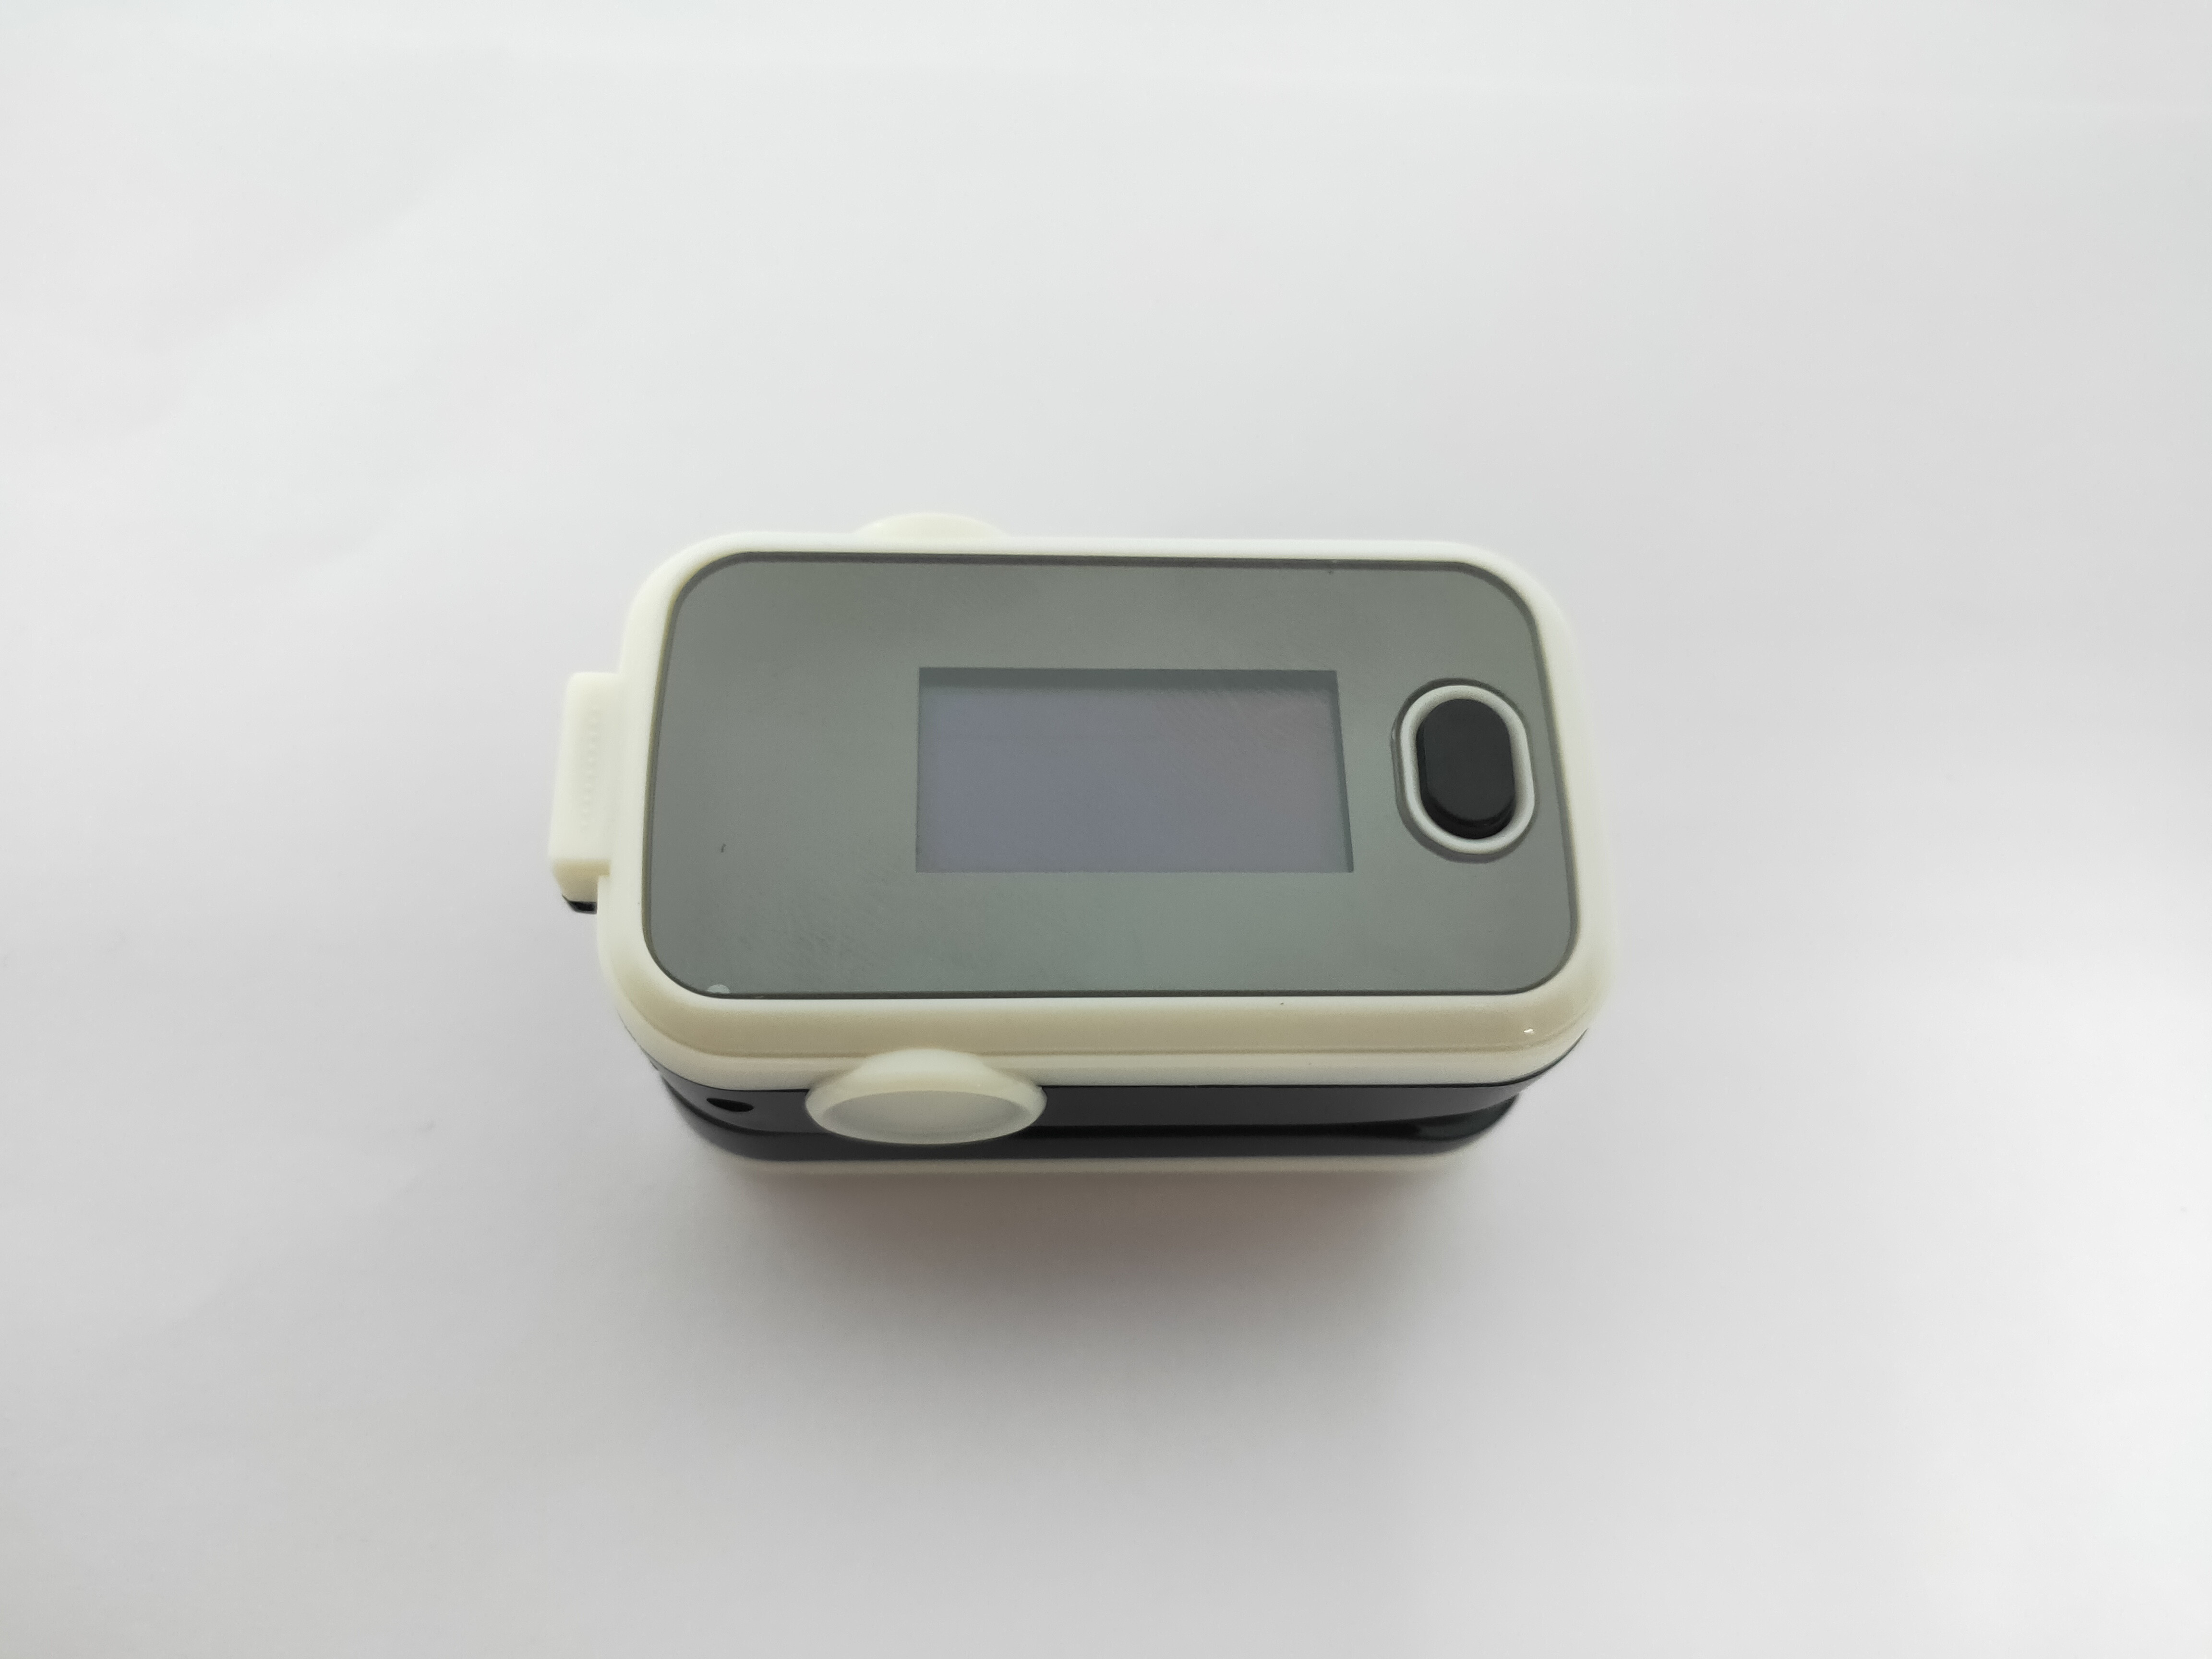 NEWLY UPGRADED  Measures Fingertip pulse Oximeter rate and SpO2 blood